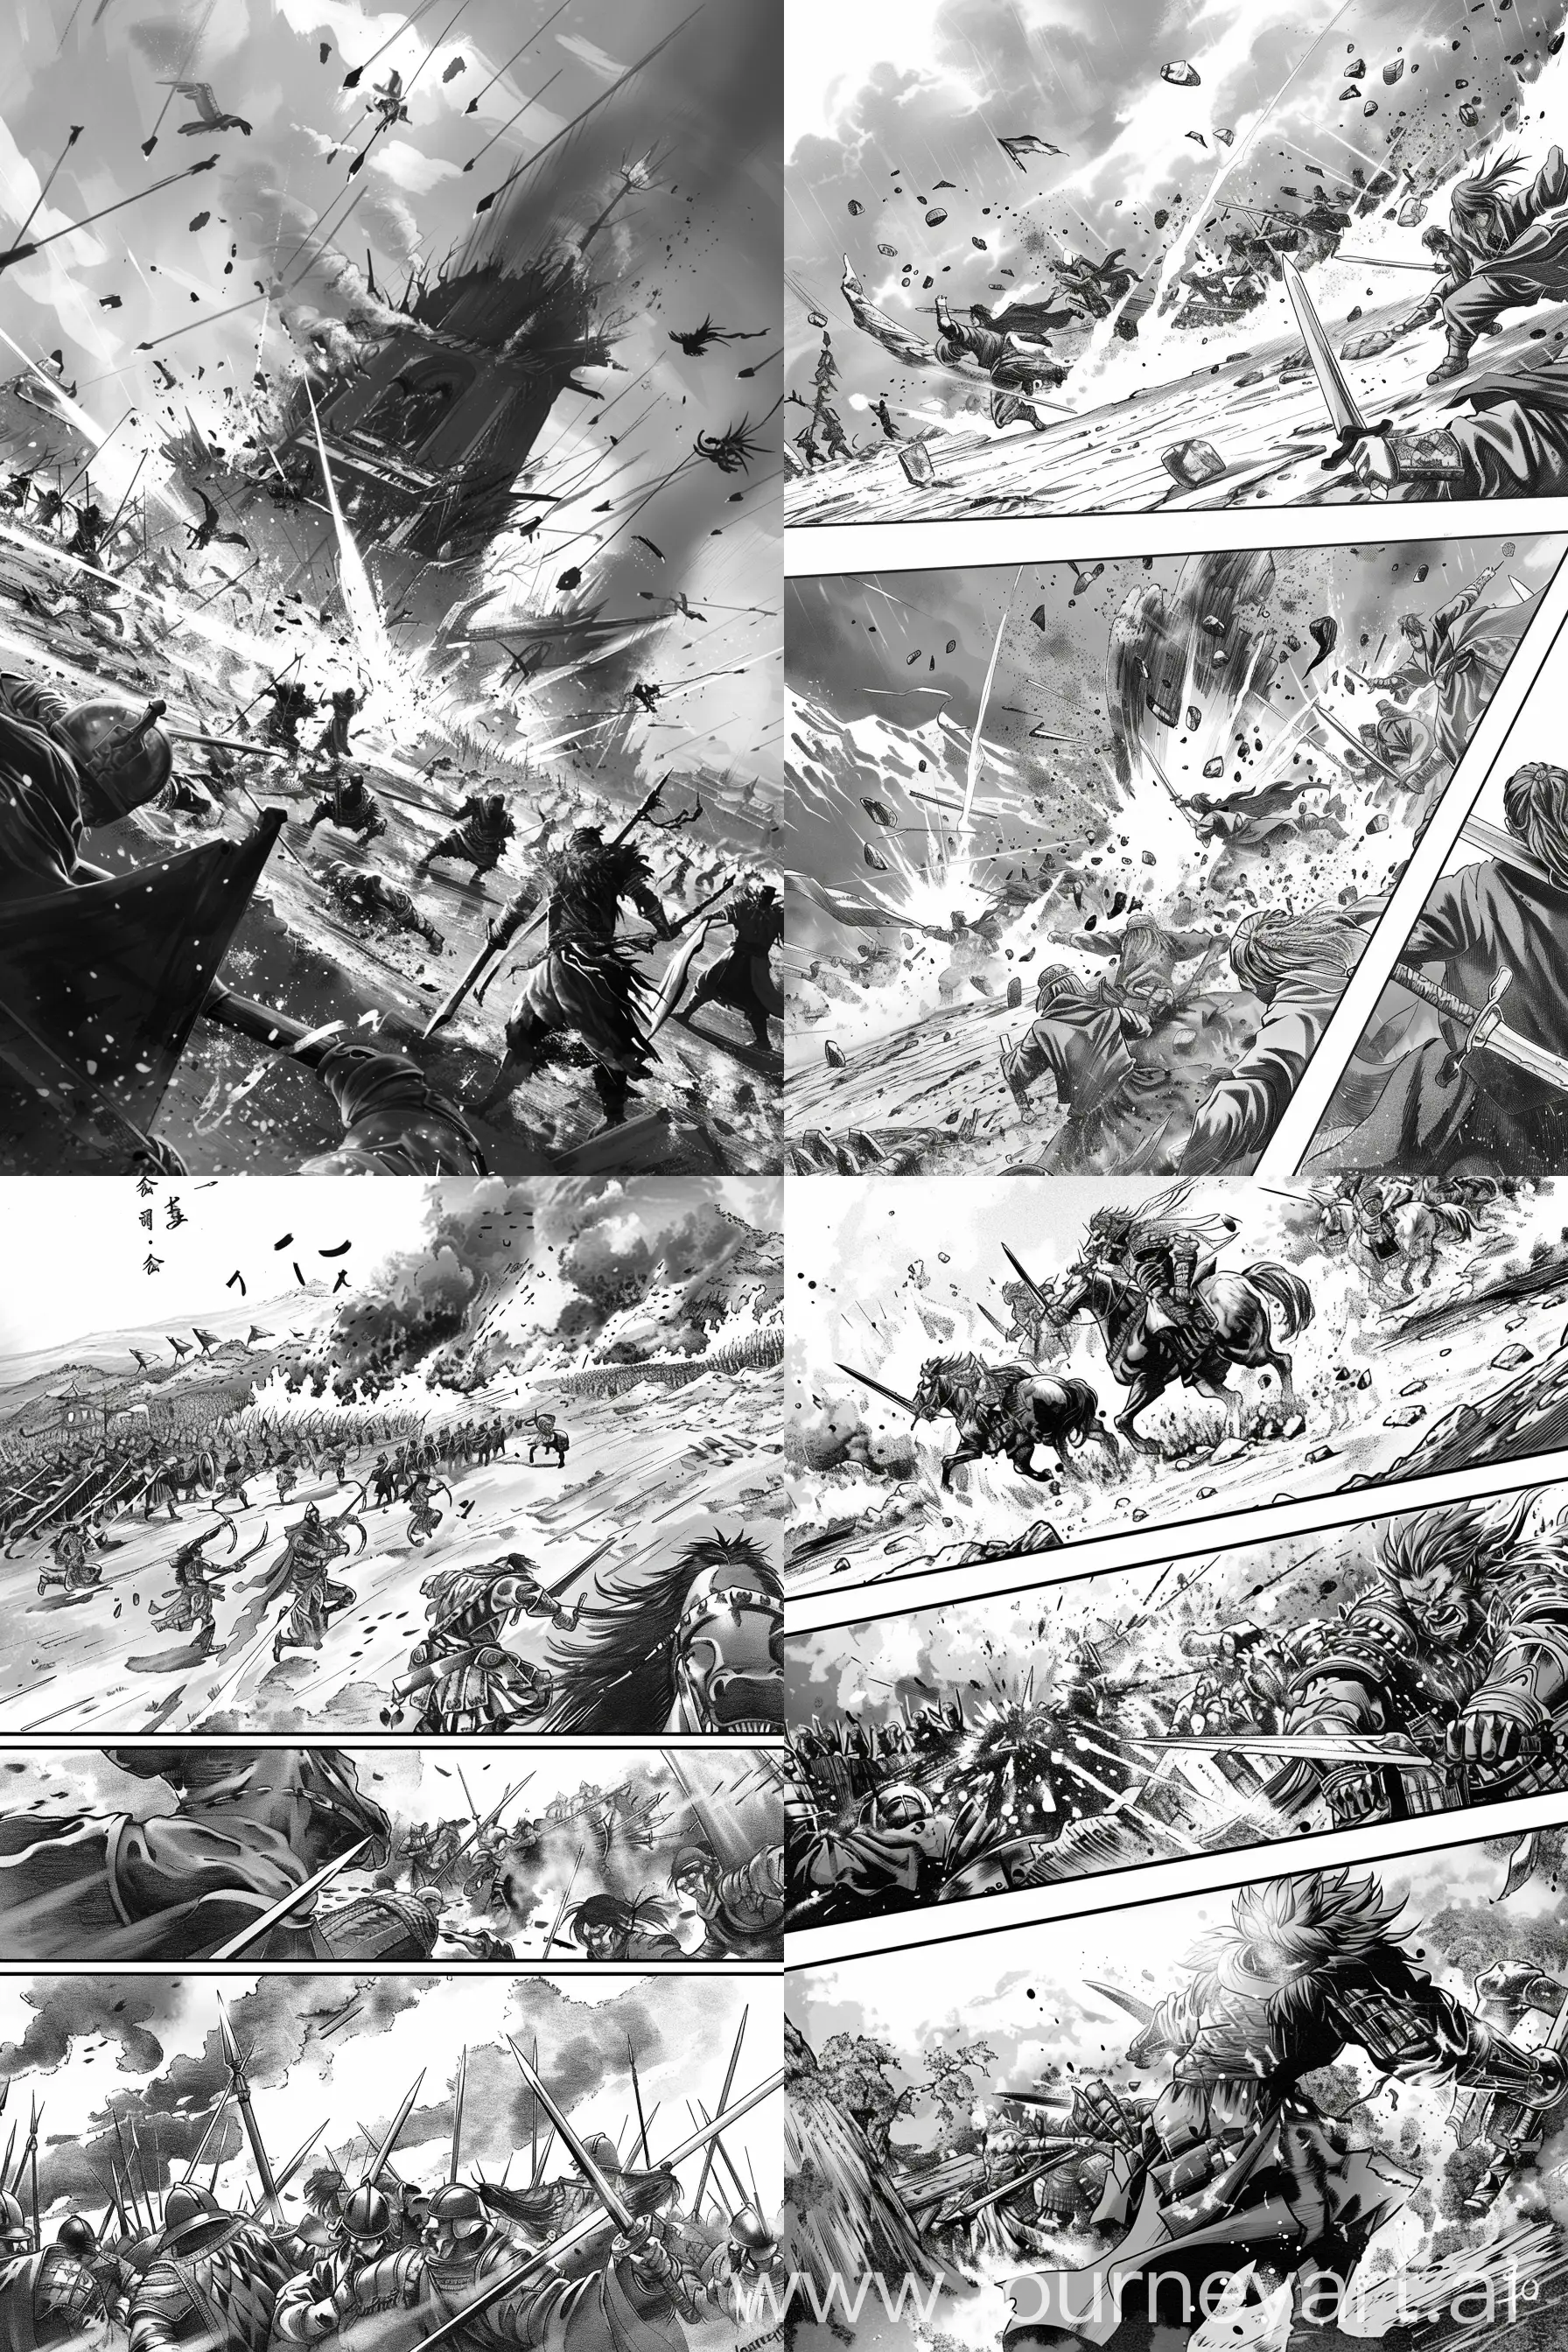 Manga style,create 3 or 4 pictures,black and white,a legendary war scene,no advanced weapons,people are fighting with magic and spirit powers,fantasy,not show anyone's face,showcase destruction,avoid distortion. --ar 2:3 